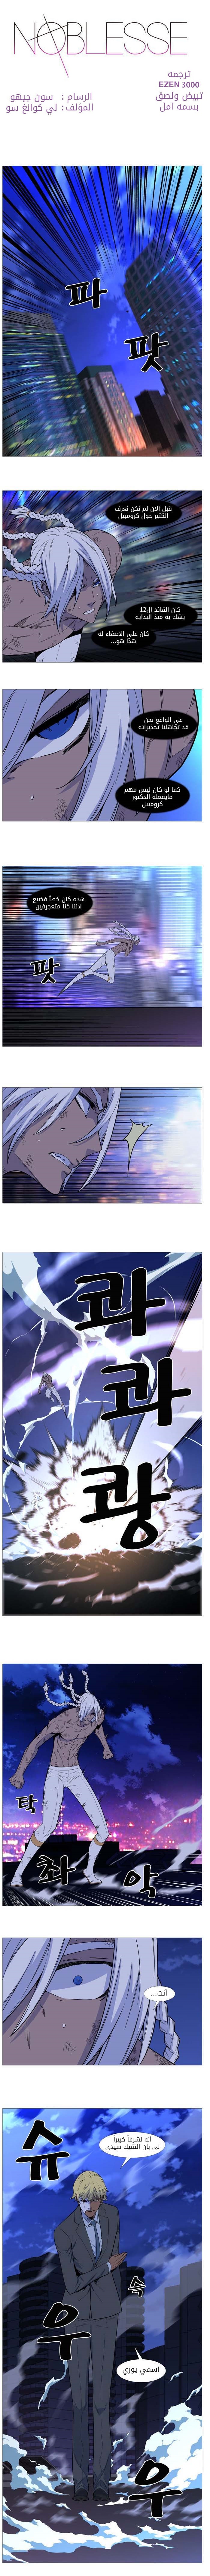 Noblesse: Chapter 510 - Page 1